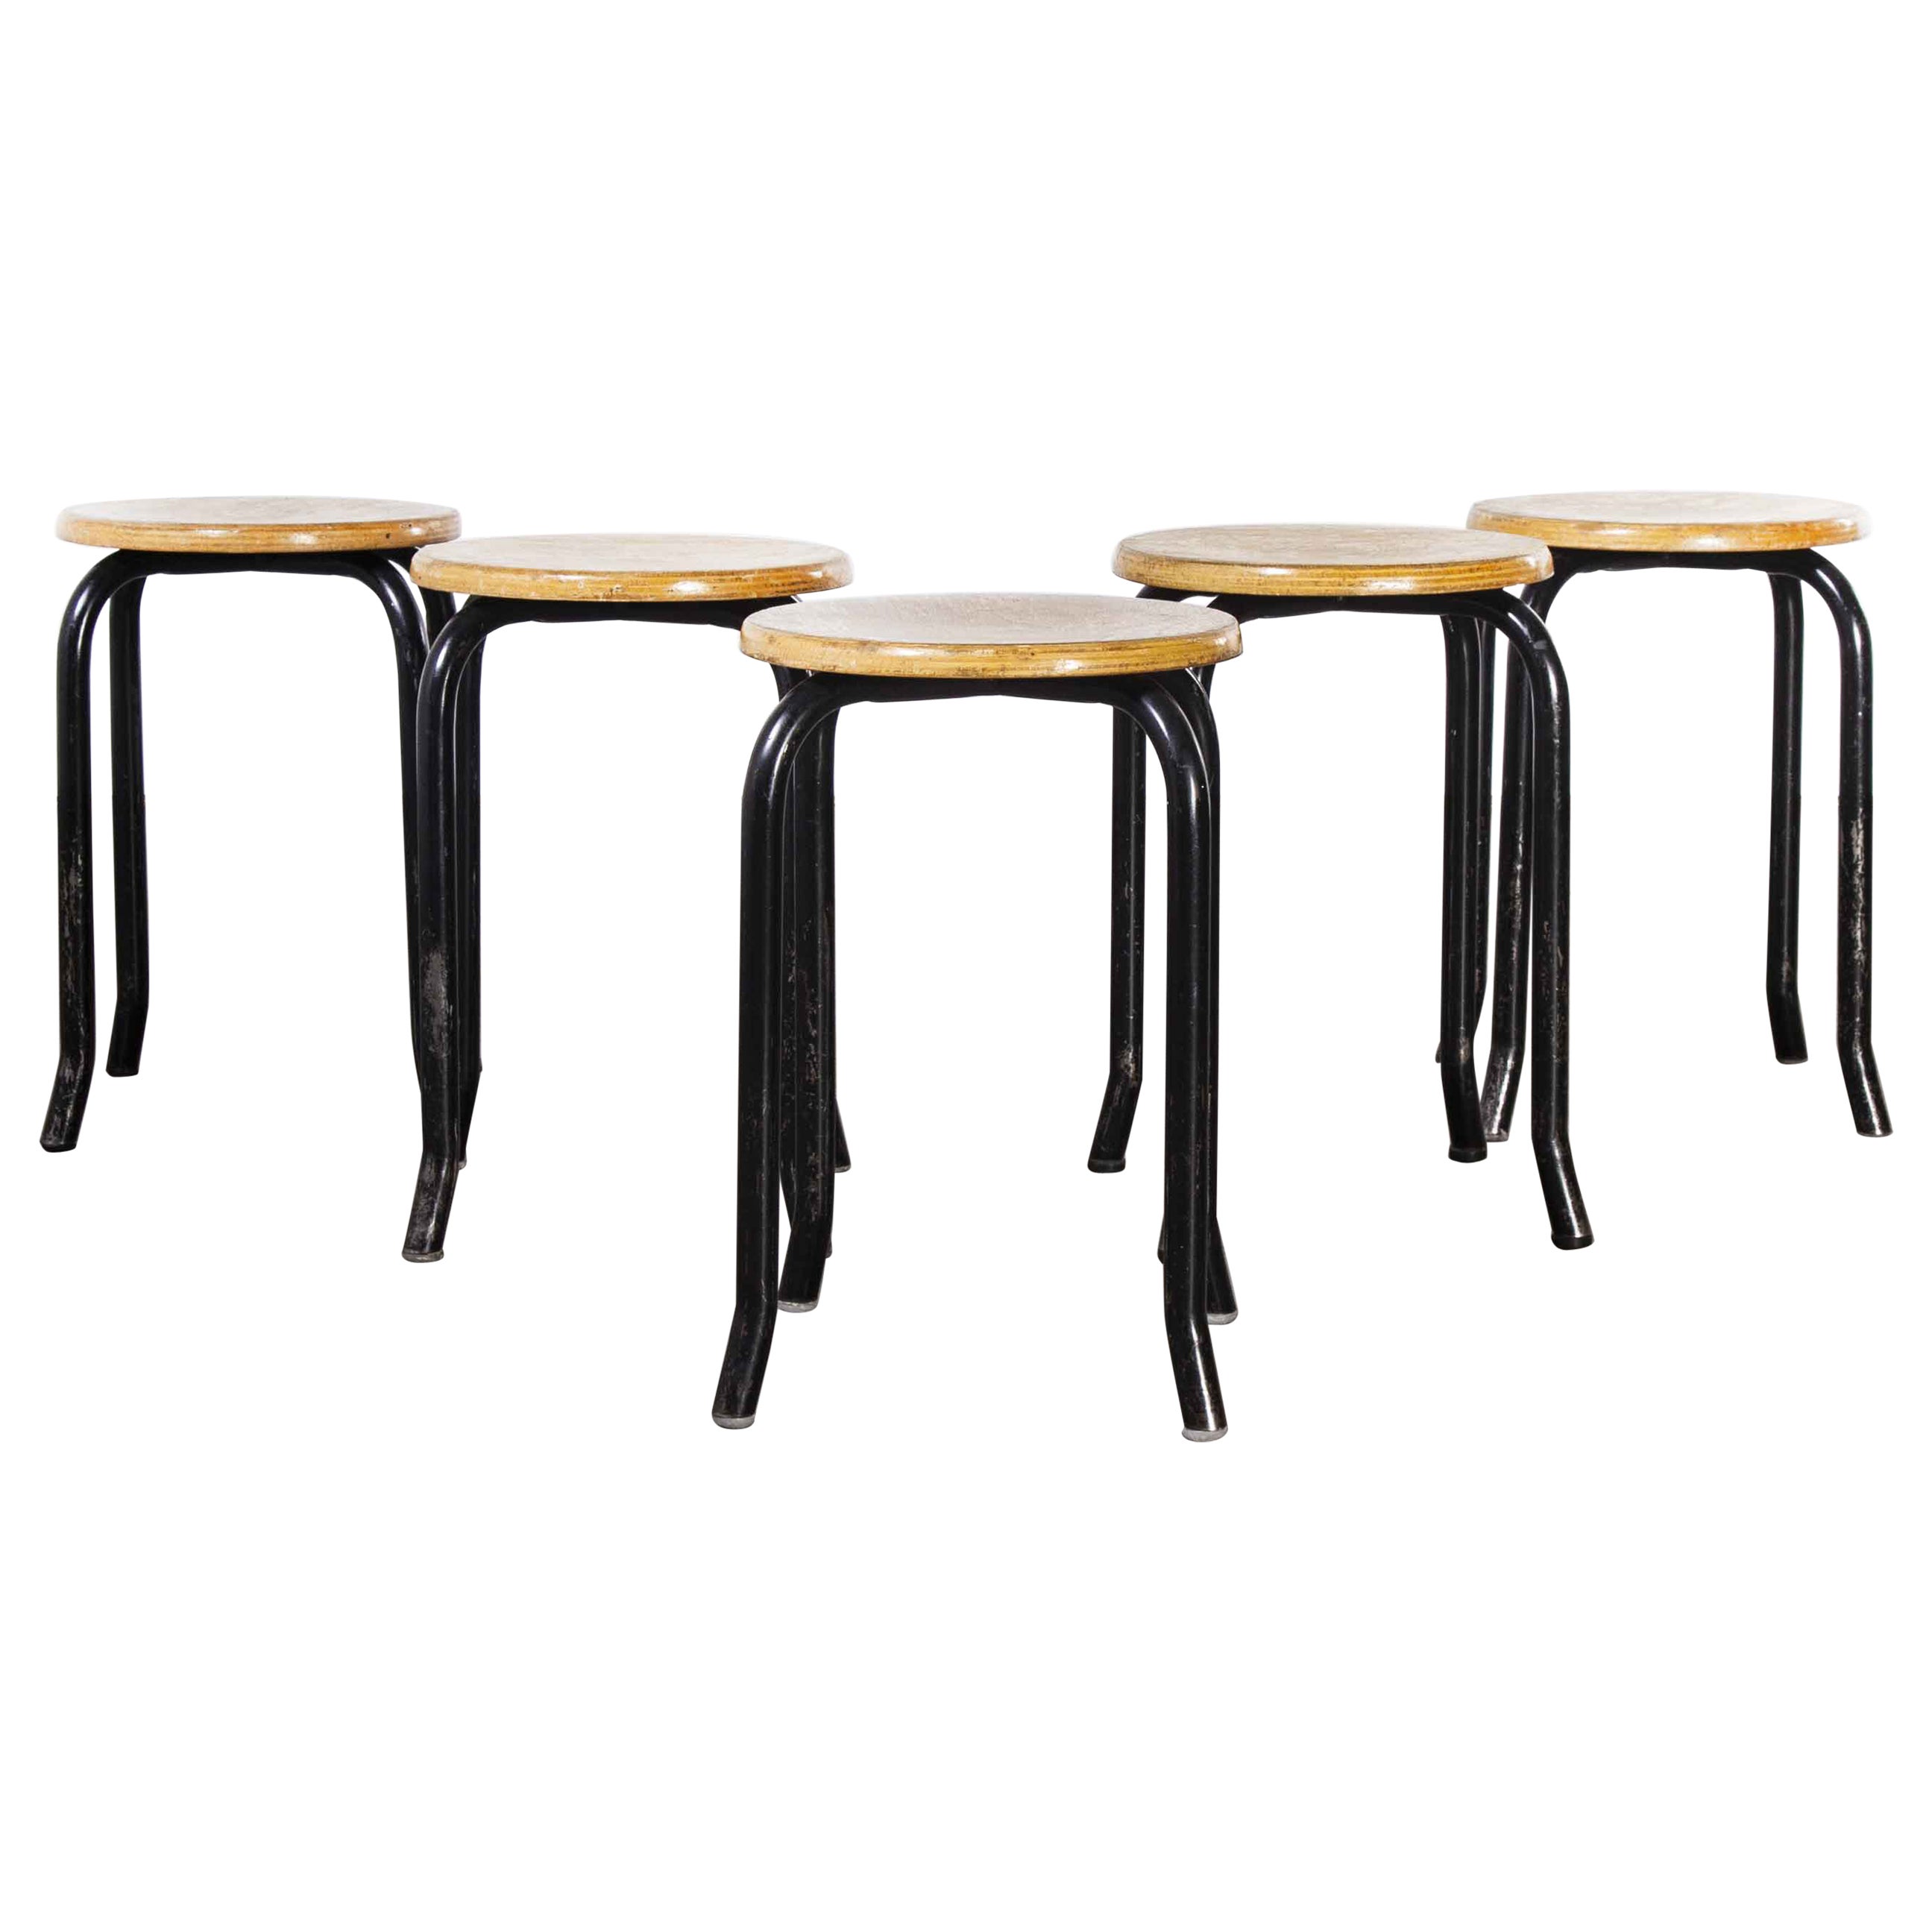 1960's Simple French Stacking School Stools, Black, Set of Five Kick Leg